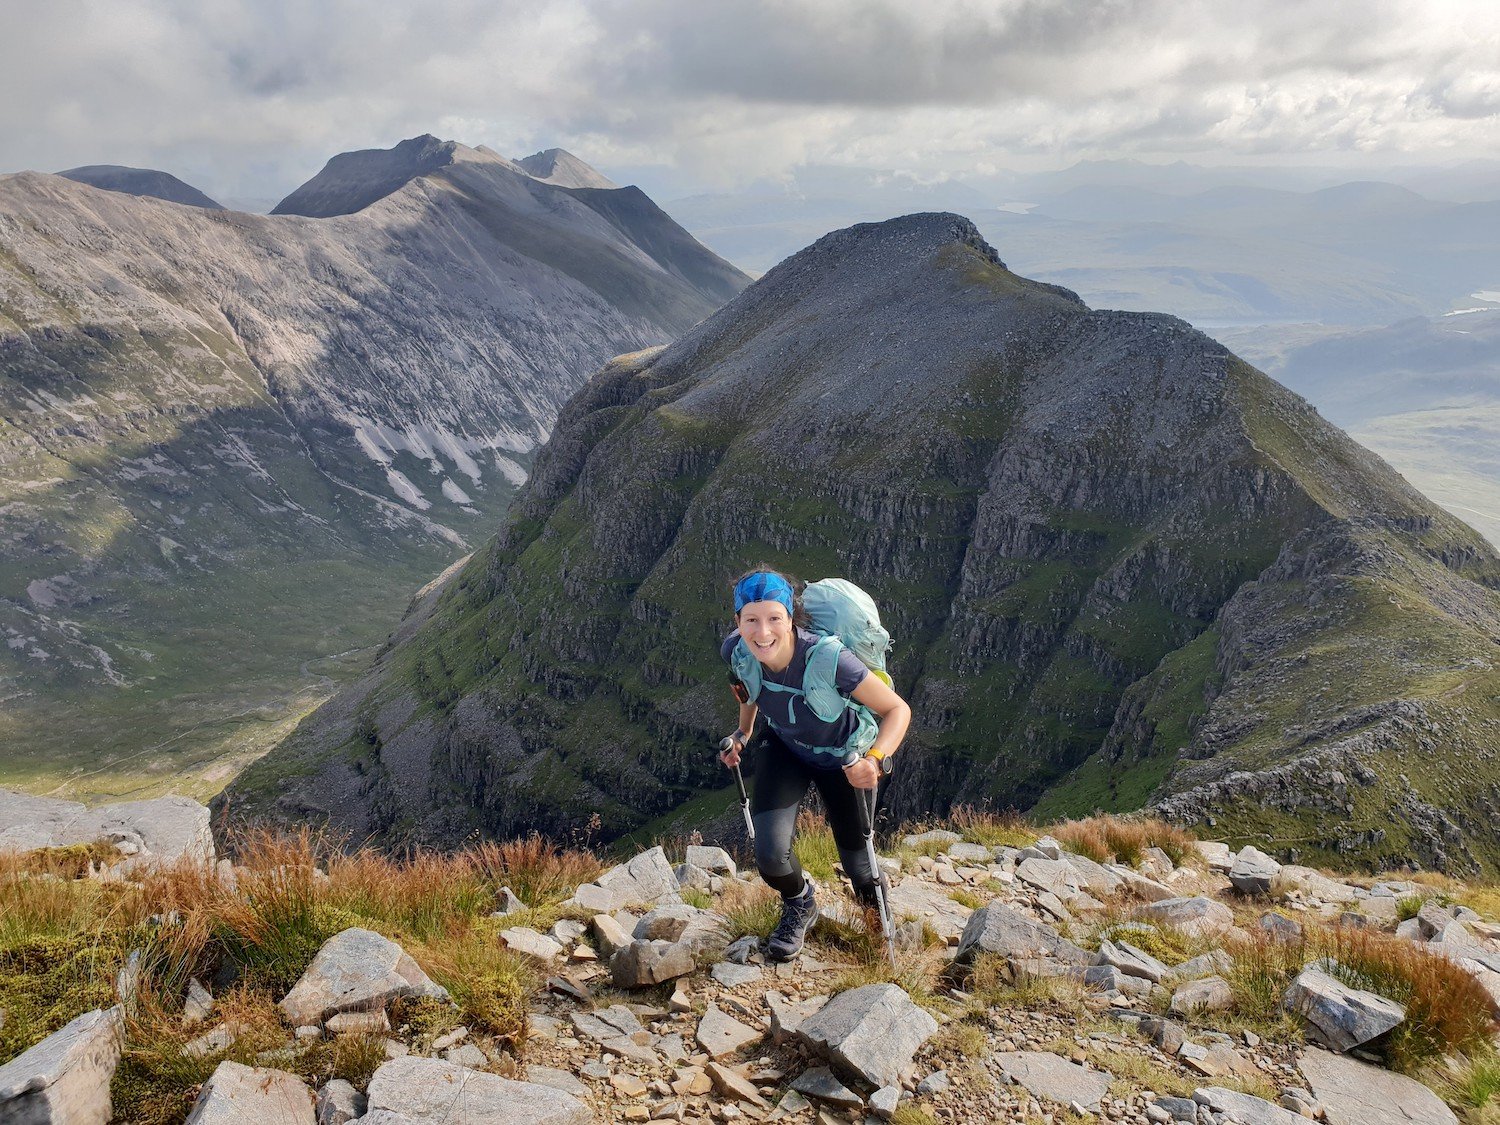 A woman ascending Liathach in Torridon